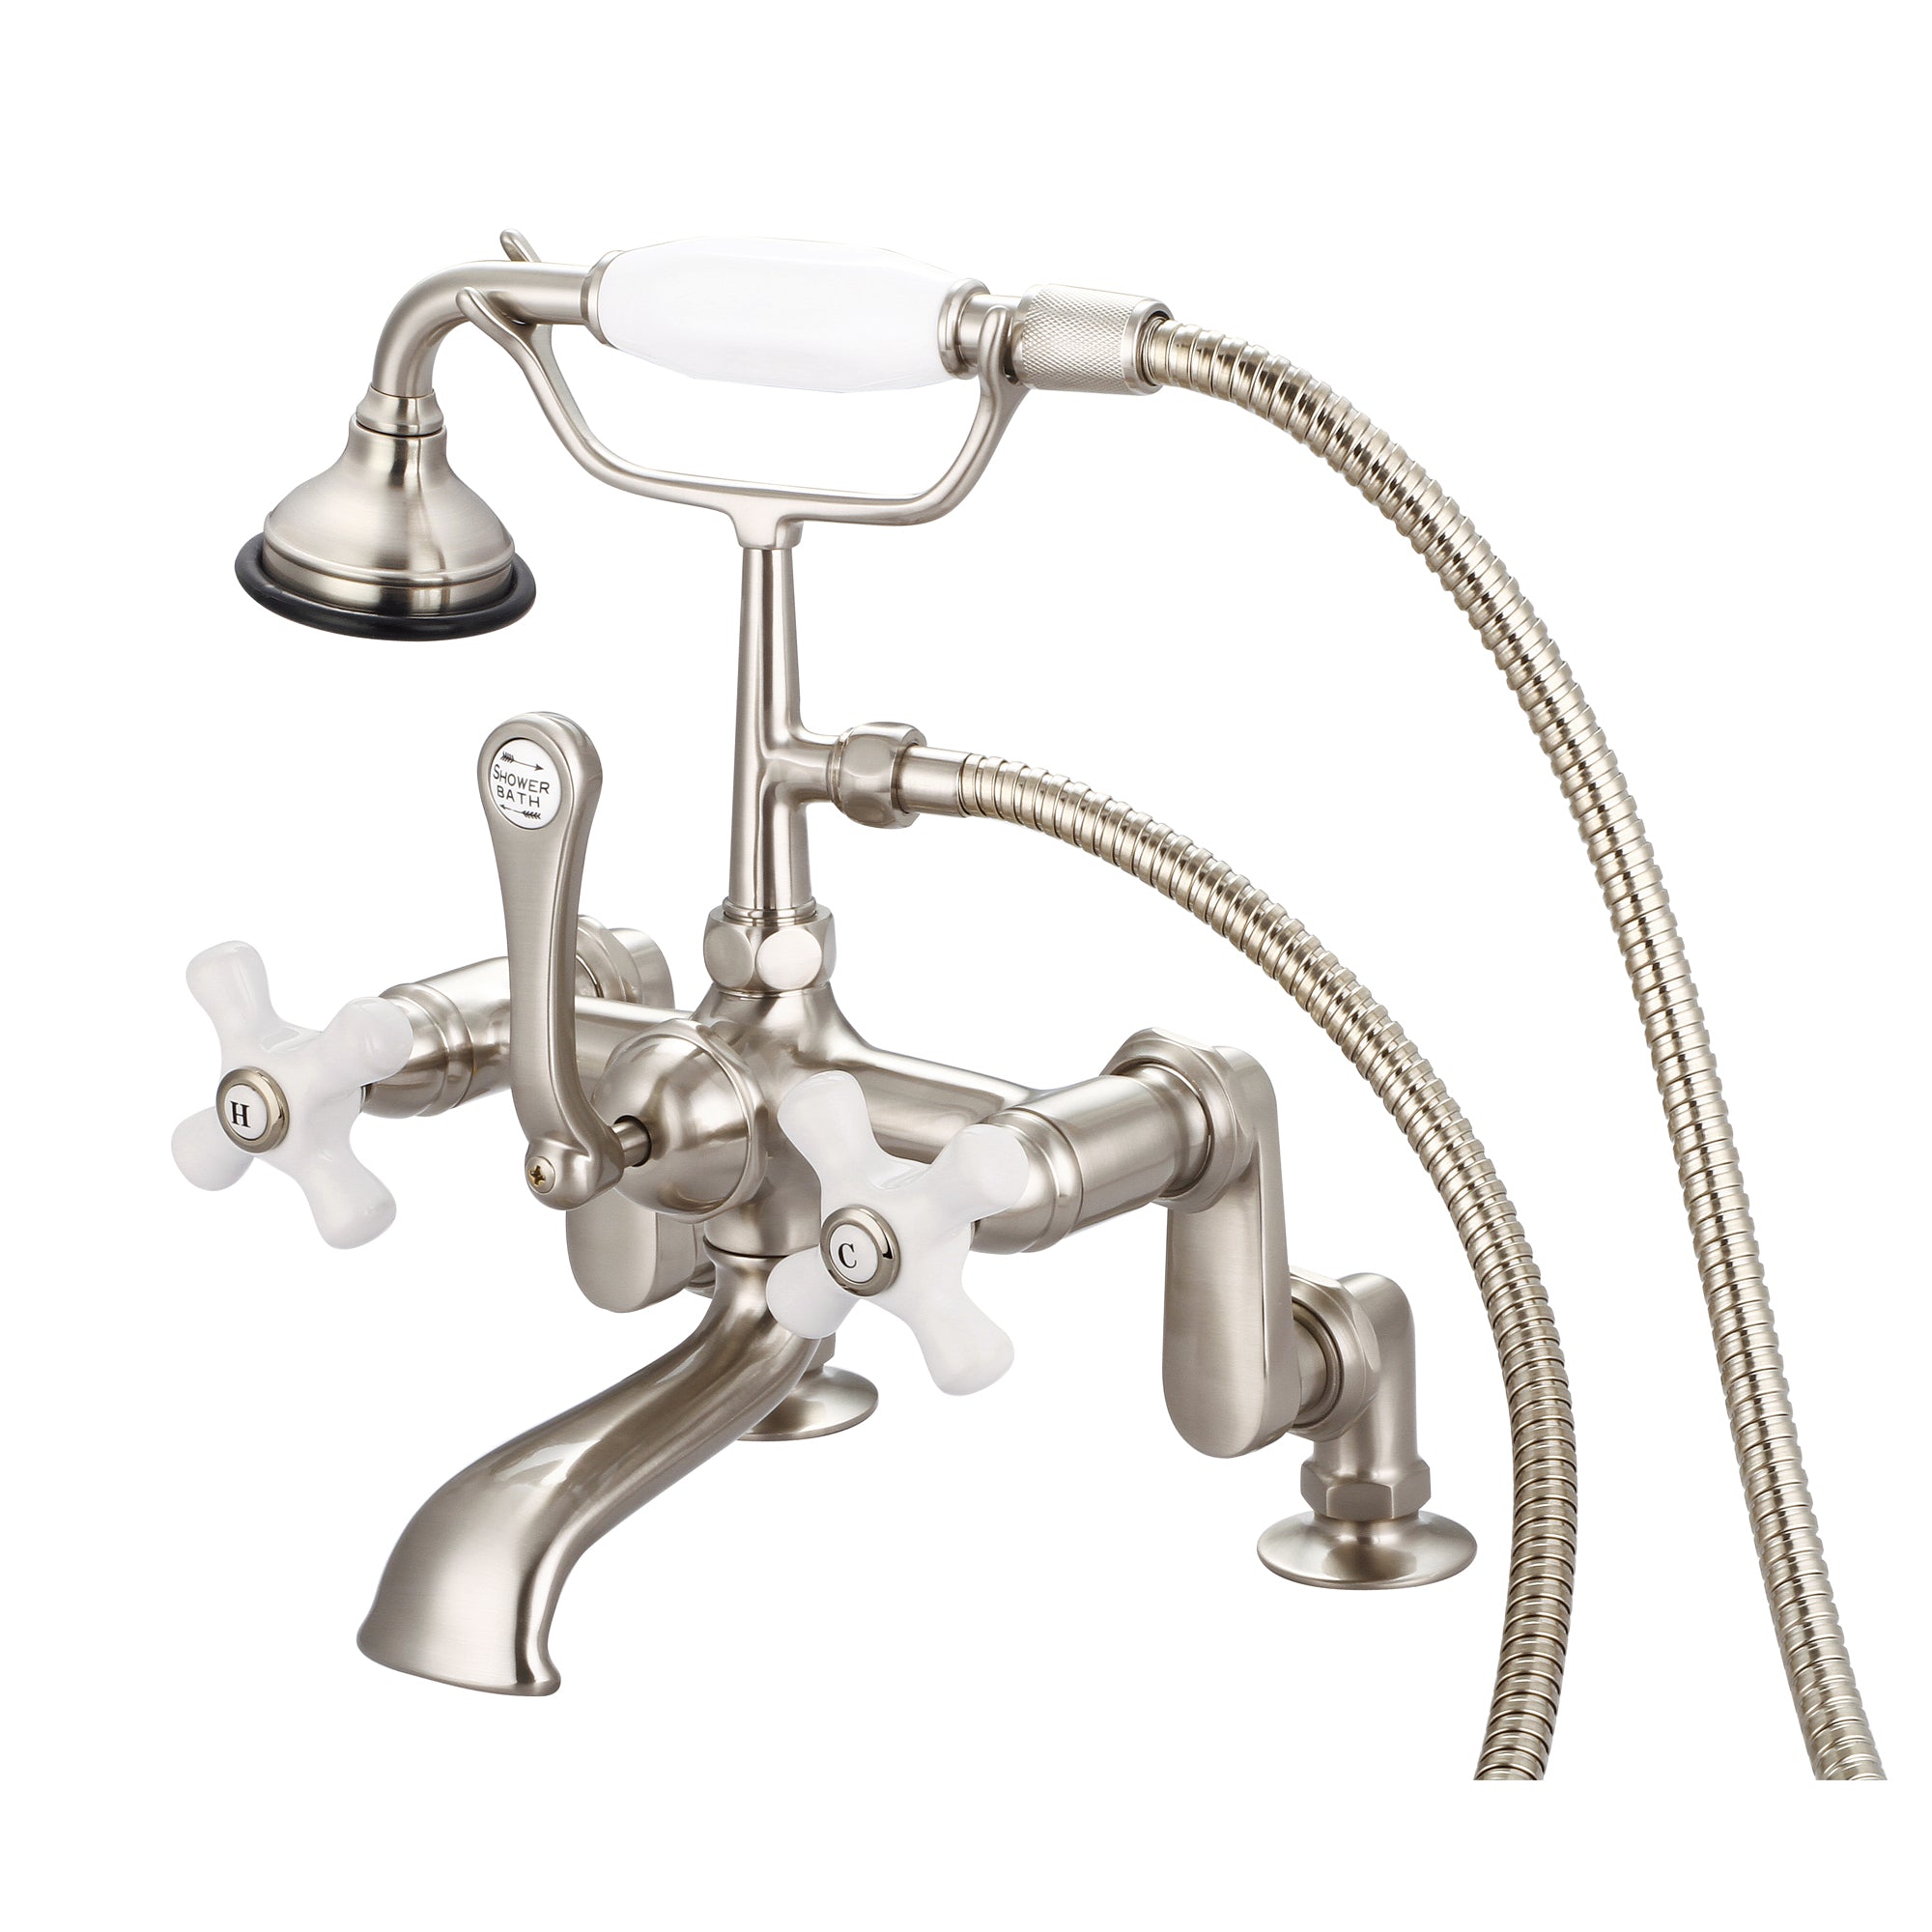 Water Creation | Vintage Classic Adjustable Center Deck Mount Tub Faucet With Handheld Shower in Brushed Nickel Finish With Porcelain Cross Handles, Hot And Cold Labels Included | F6-0008-02-PX